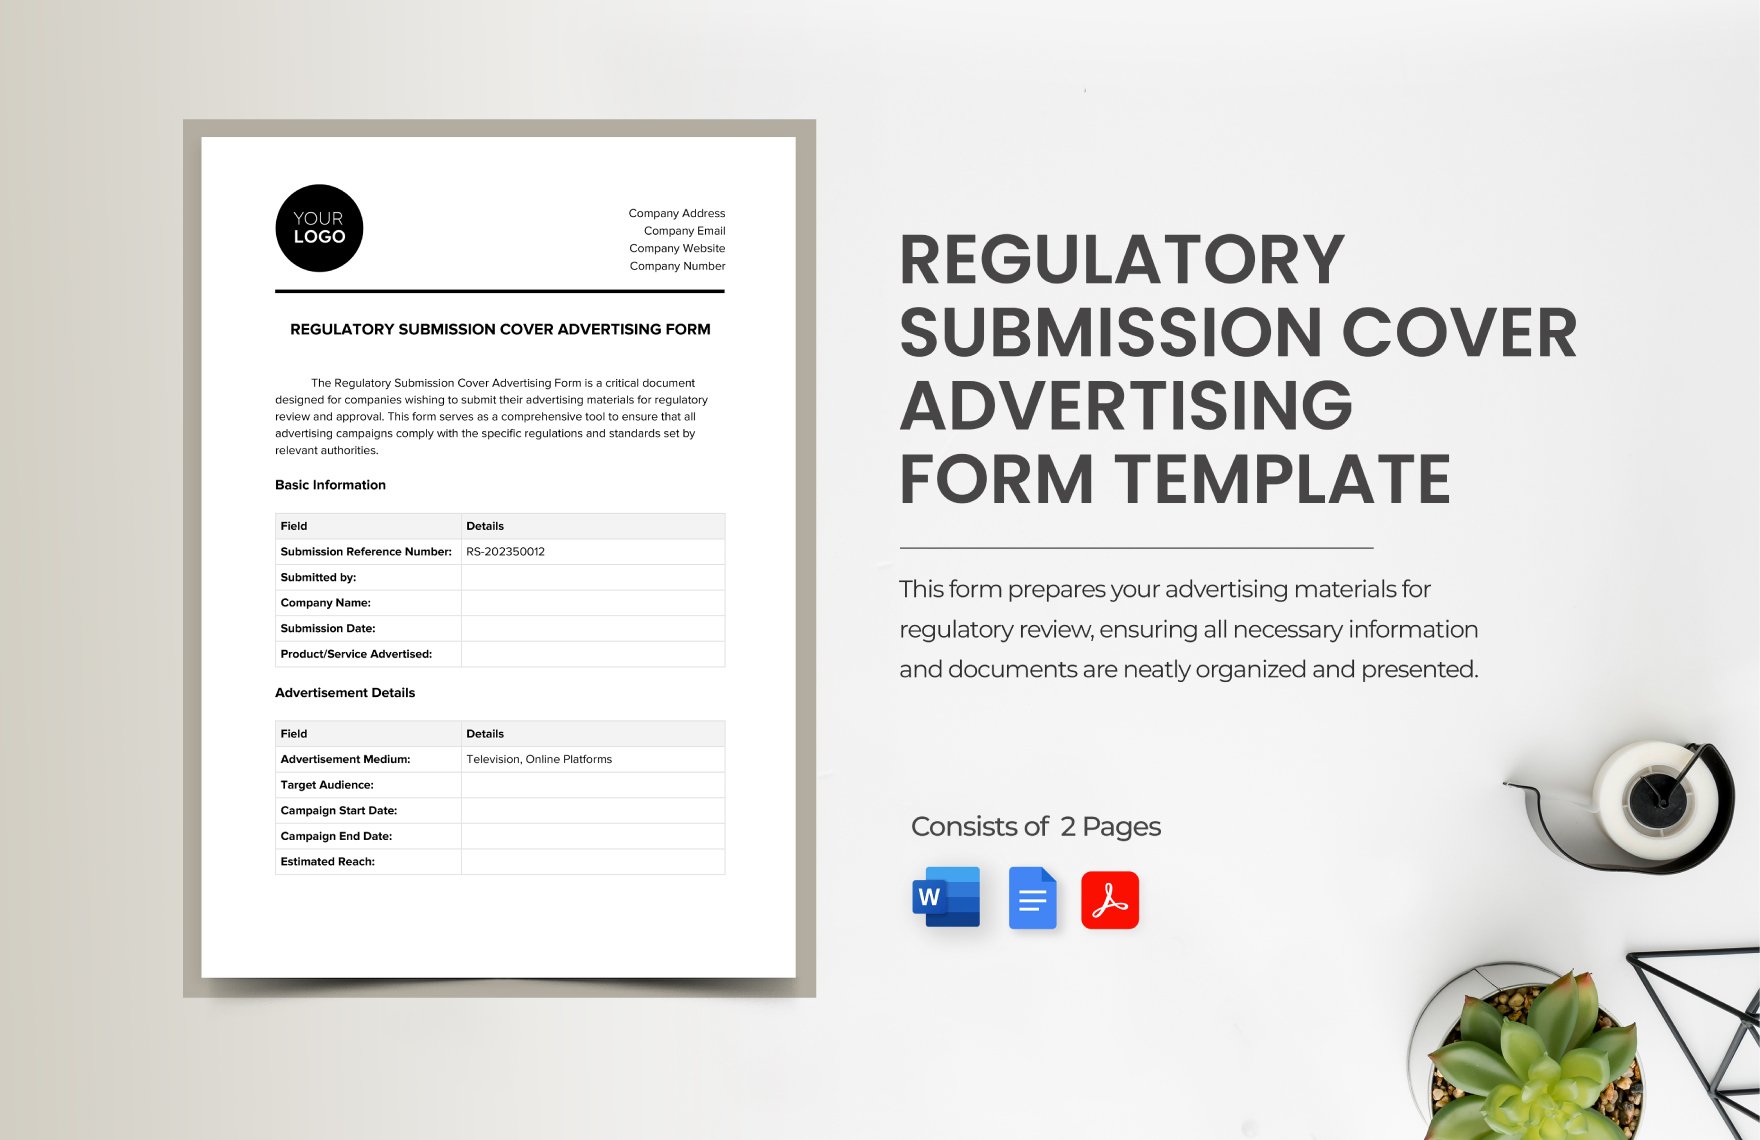 Regulatory Submission Cover Advertising Form Template in Word, Google Docs, PDF